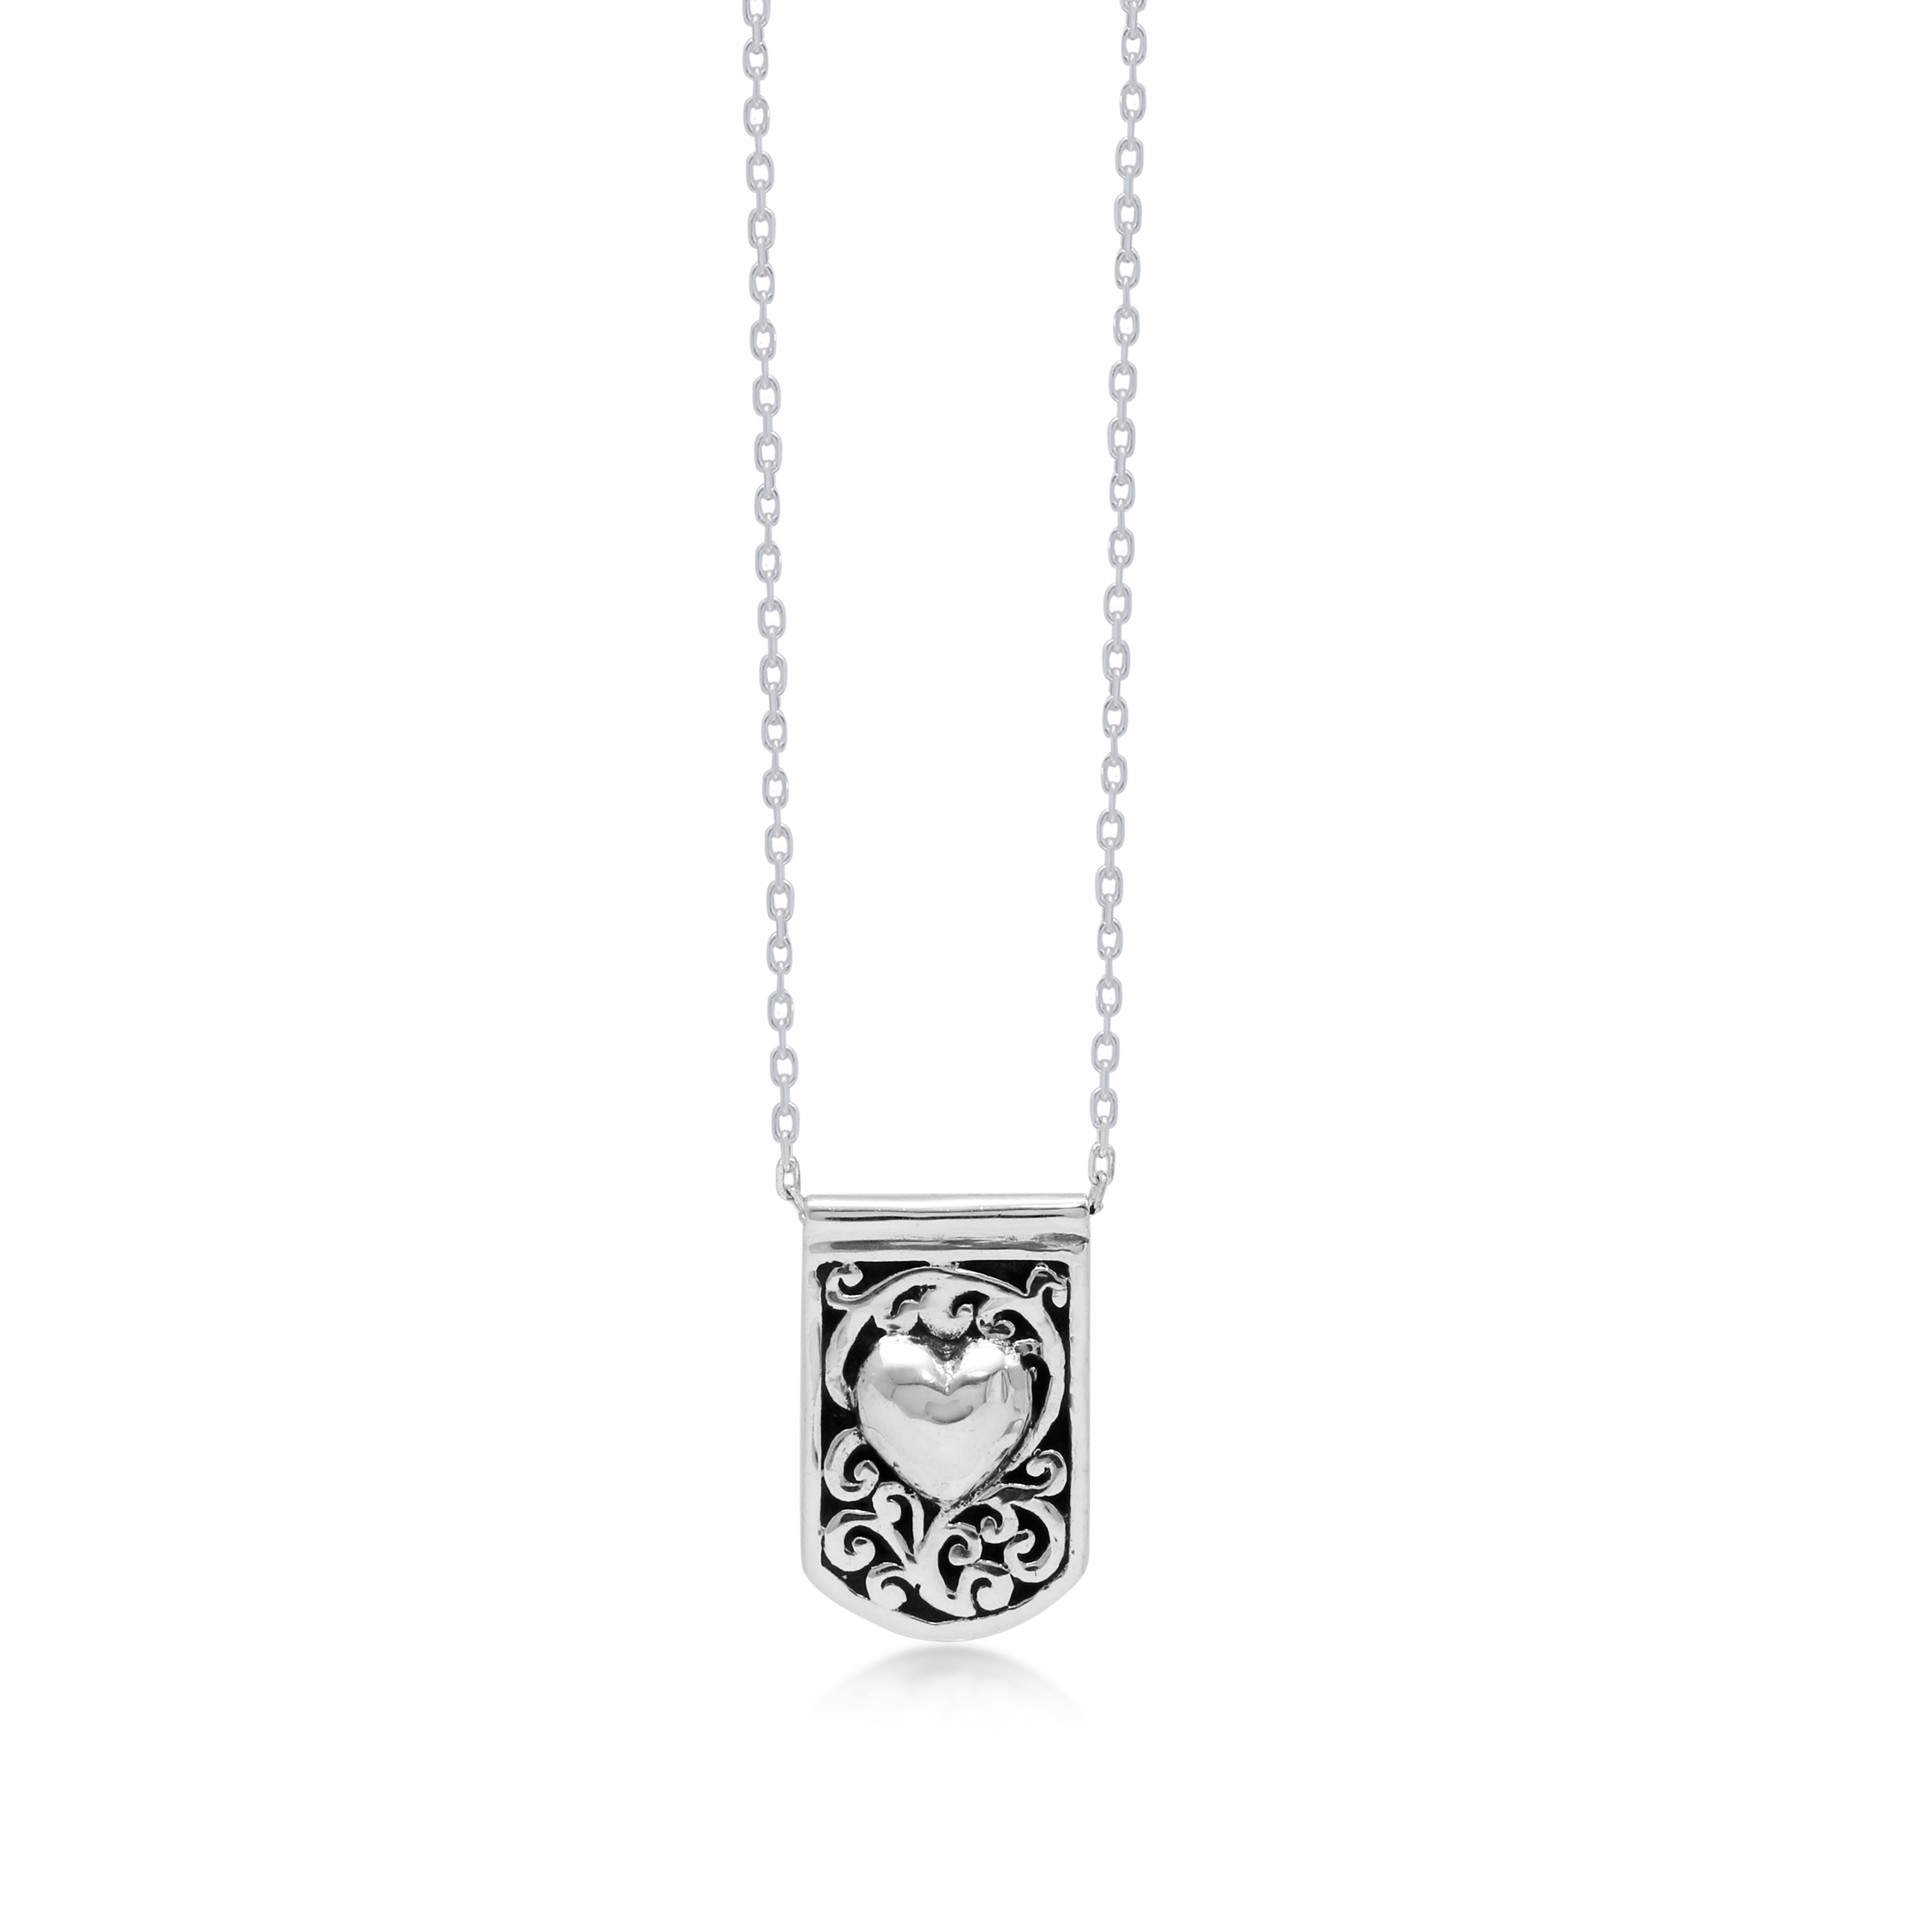 9734 Scroll ID Tag with Cross-Sign Accents Pendant Reversible Sterling Silver Necklace, by Lois Hill